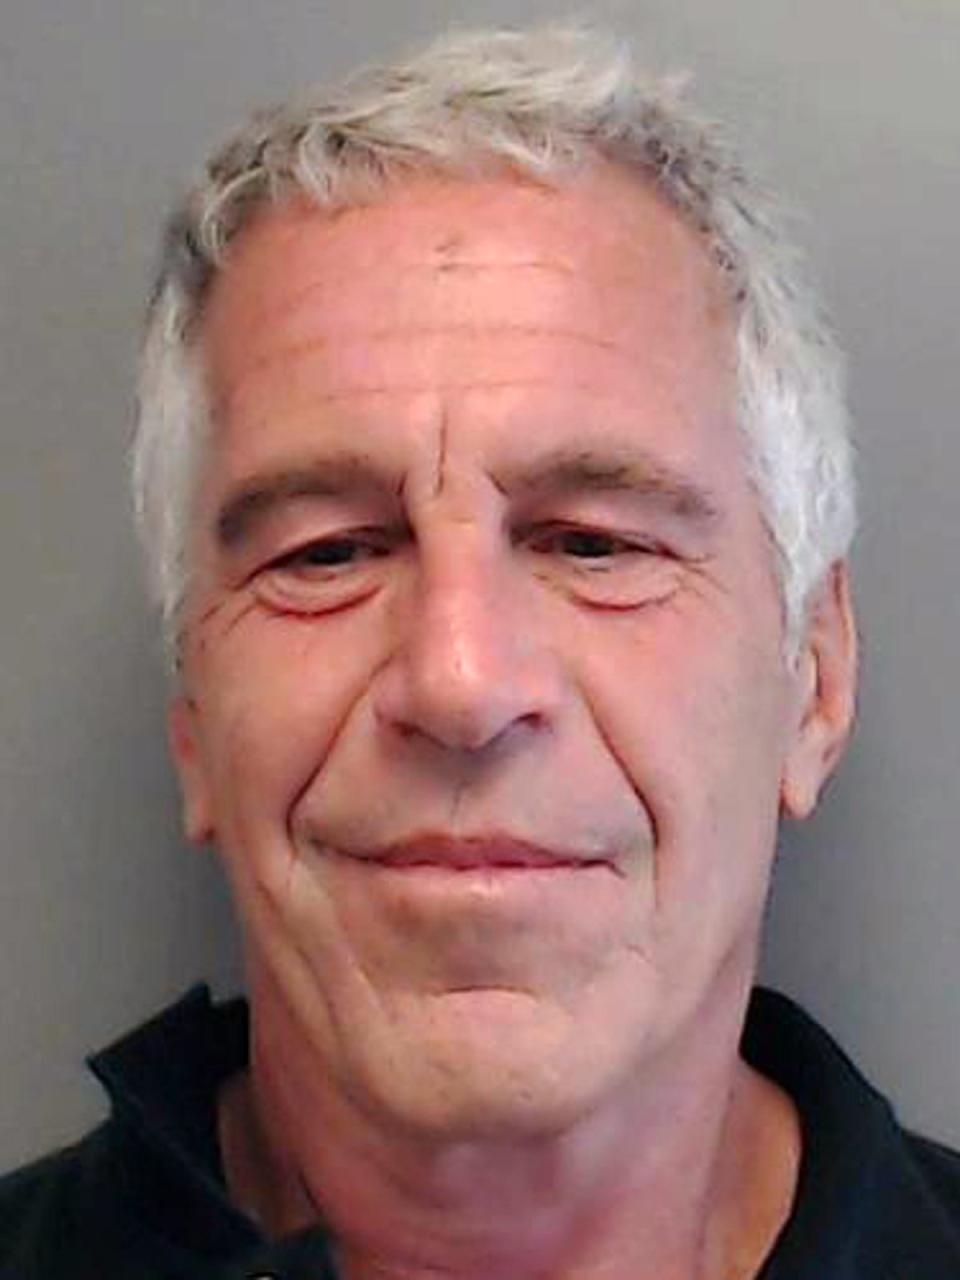 Jeffrey Epstein took his own life in 2019 (Getty Images)